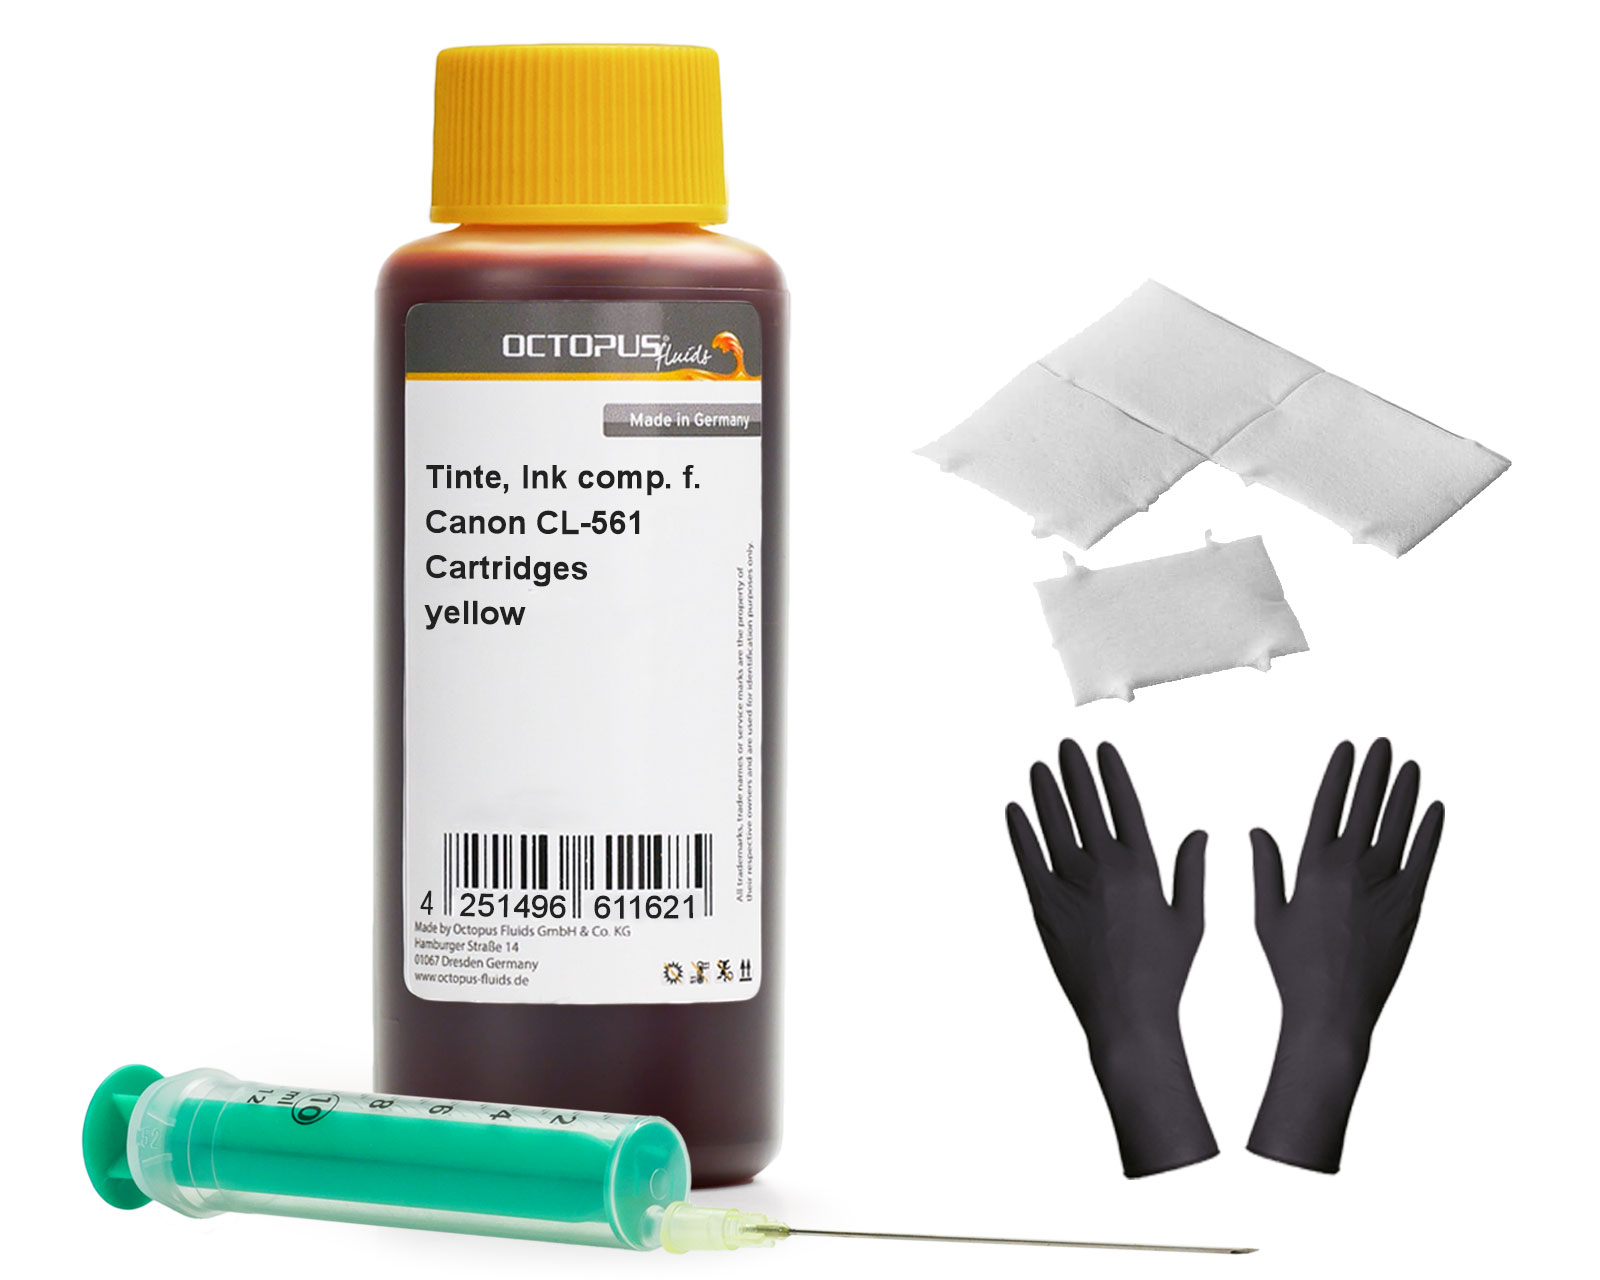 
Octopus refill ink compatible for Canon CL-561 ink cartridges, Canon Pixma TS 5300, 7400 yellow with syringe